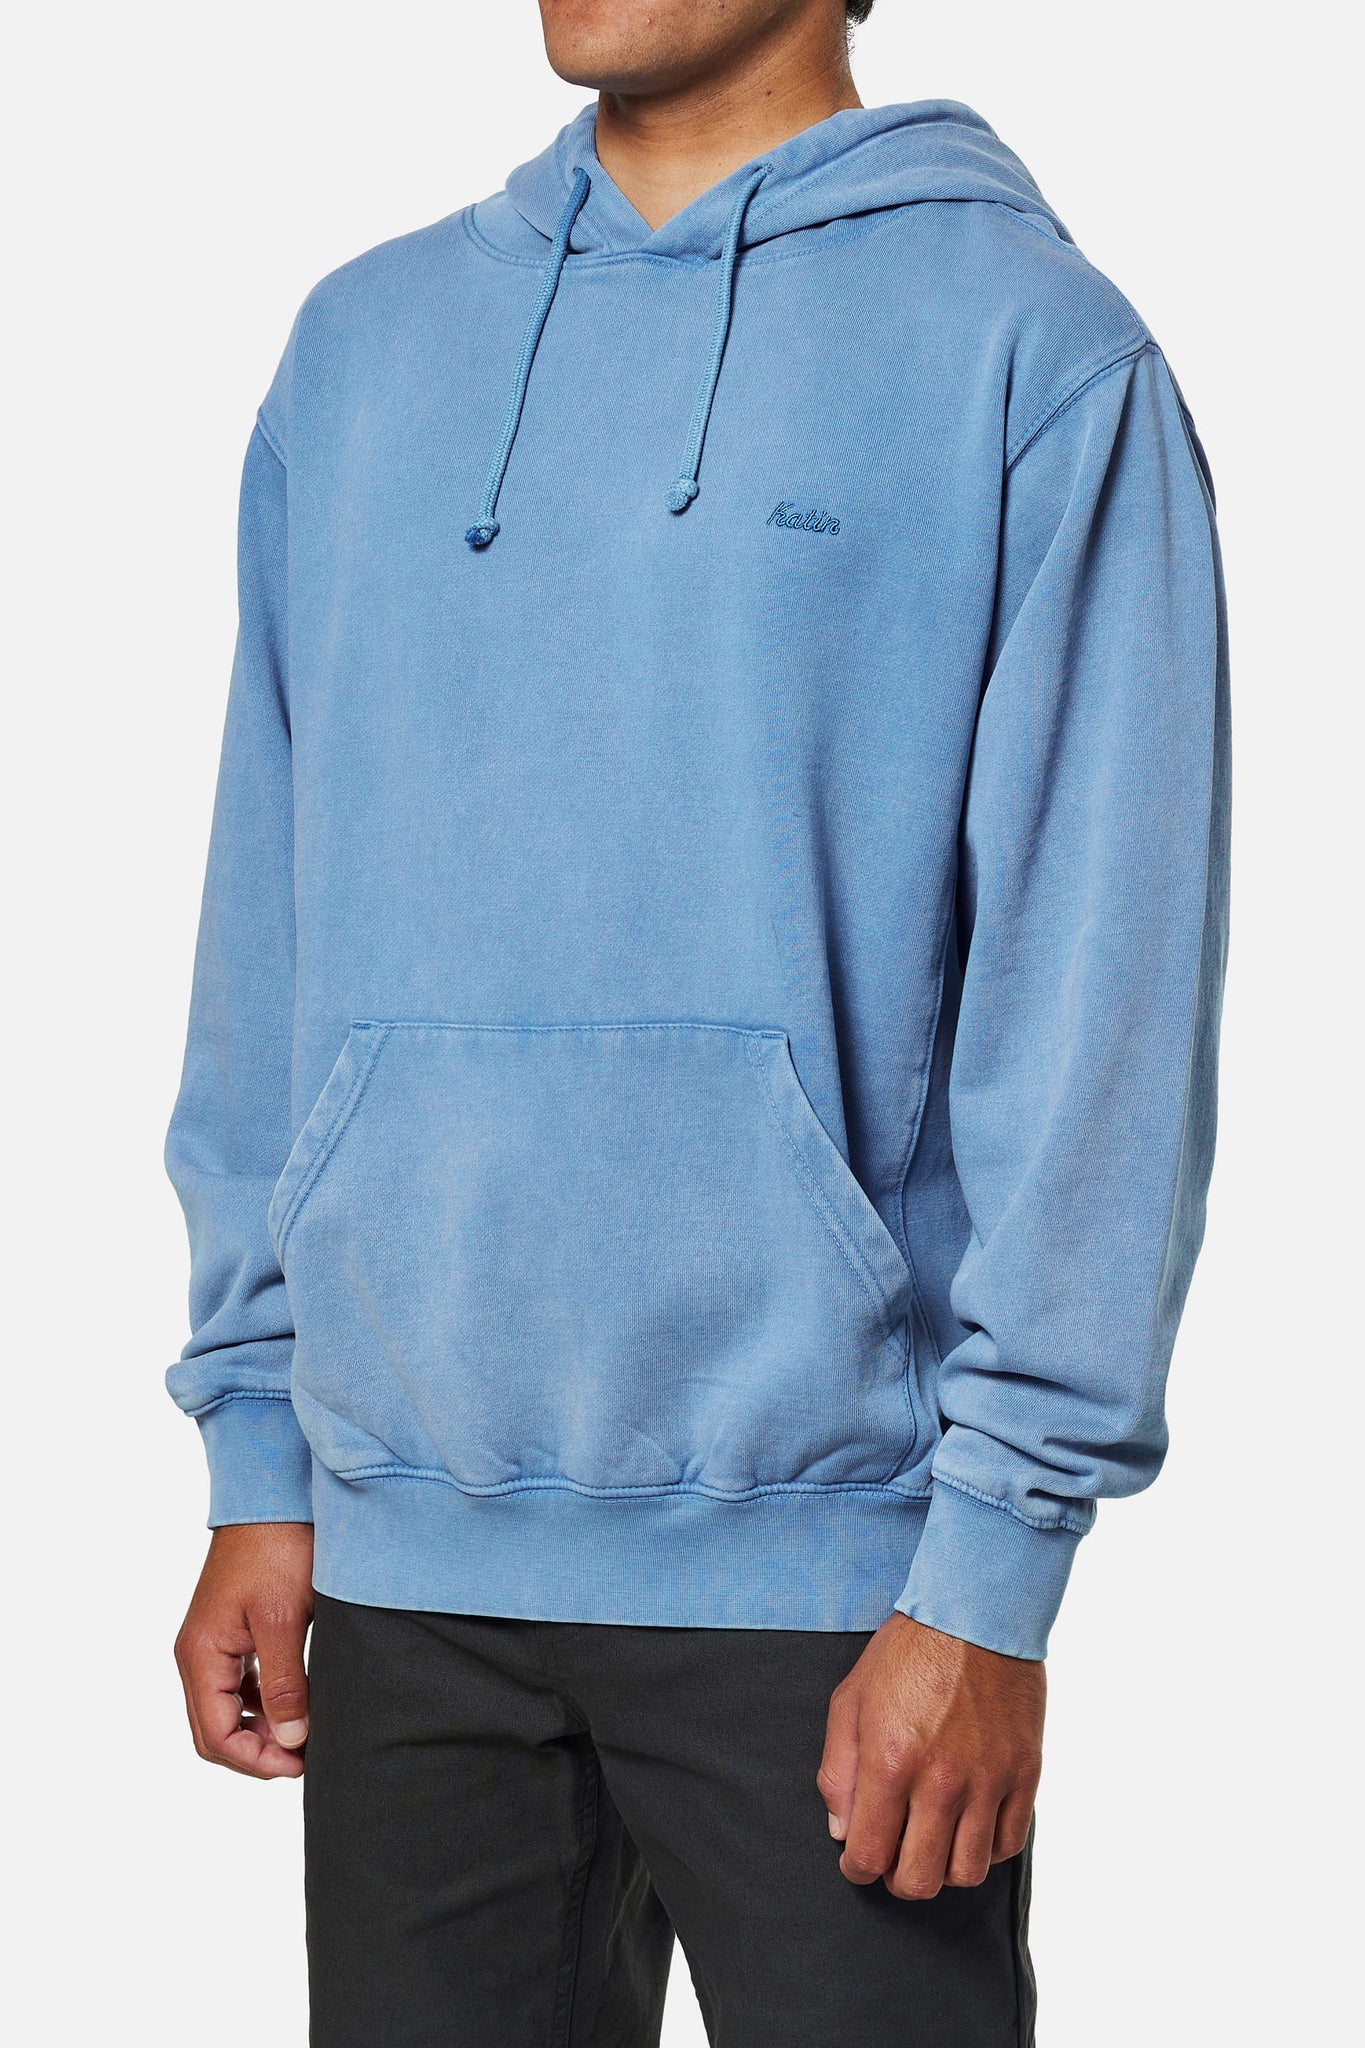 Embroidered Hoodie - Bay Blue Sand Wash